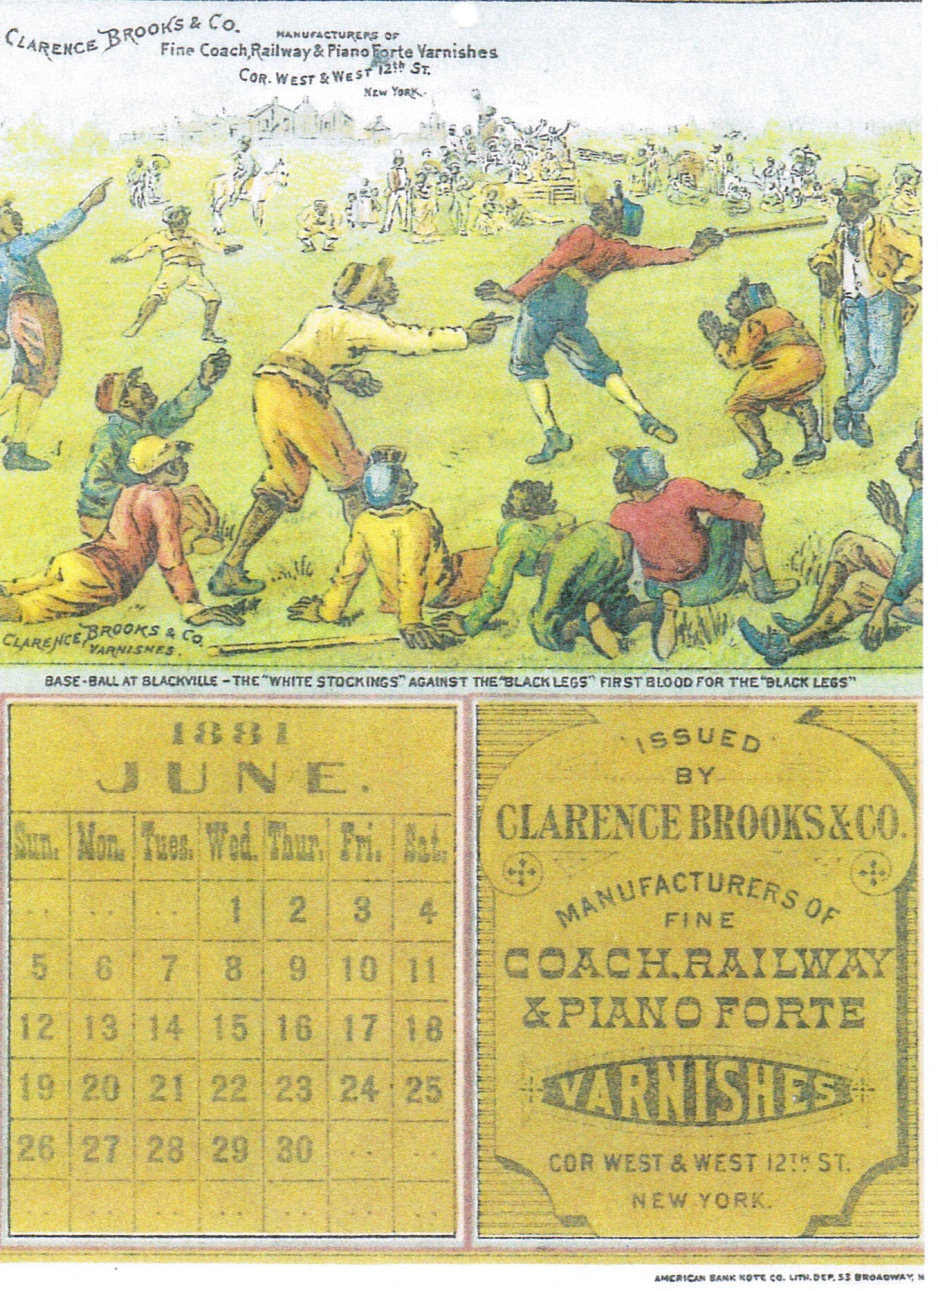 Calendar which is not a baseball advertising trade card